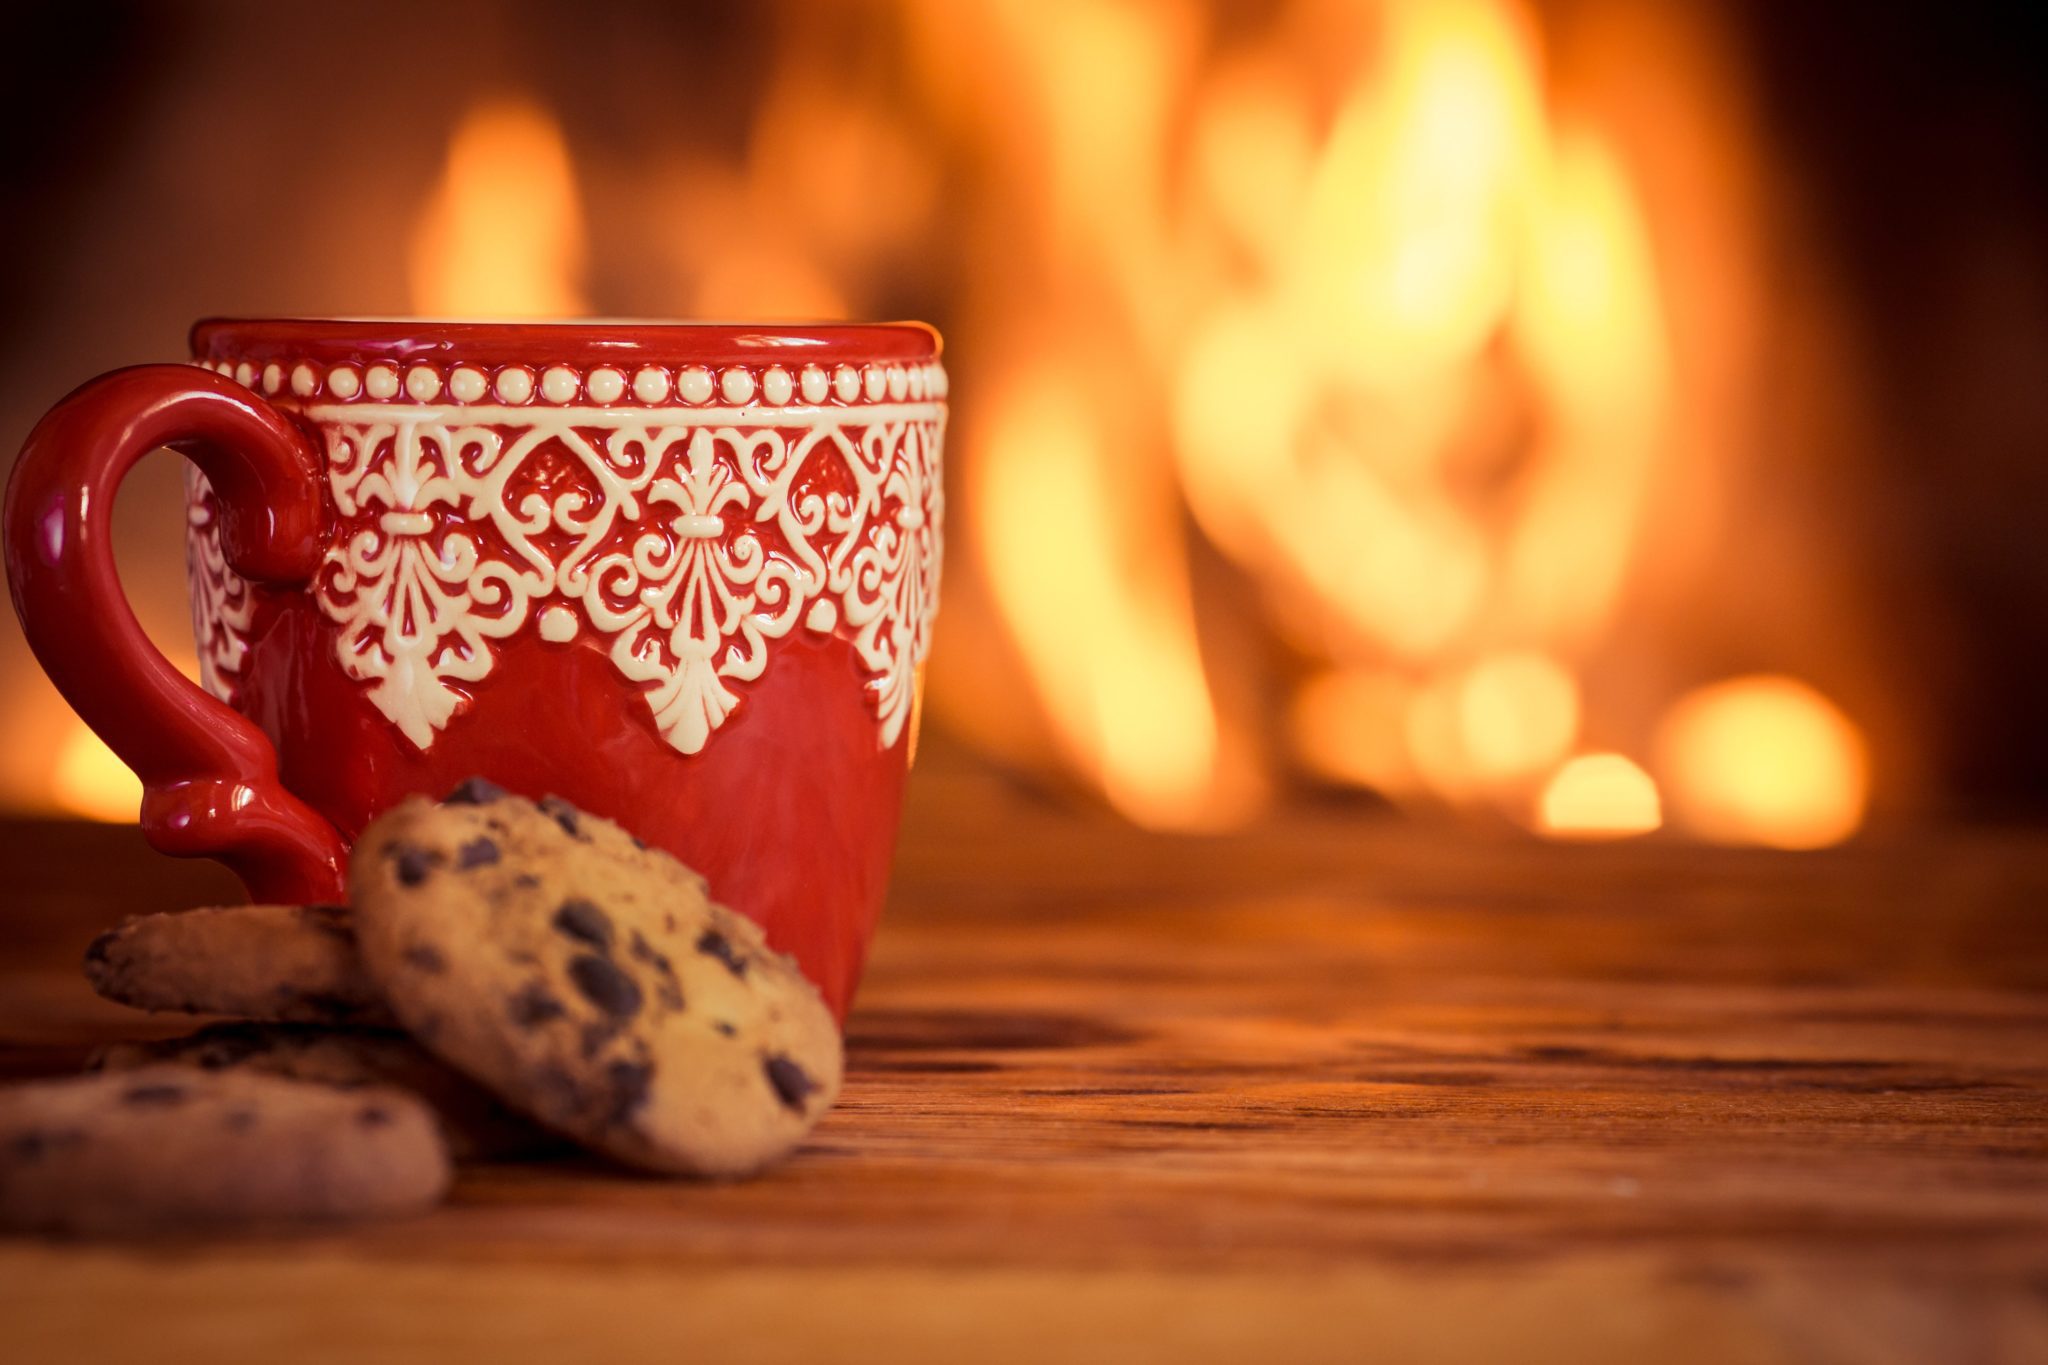 Red and white Christmas mug and chocolate chip cookie near the fireplace.